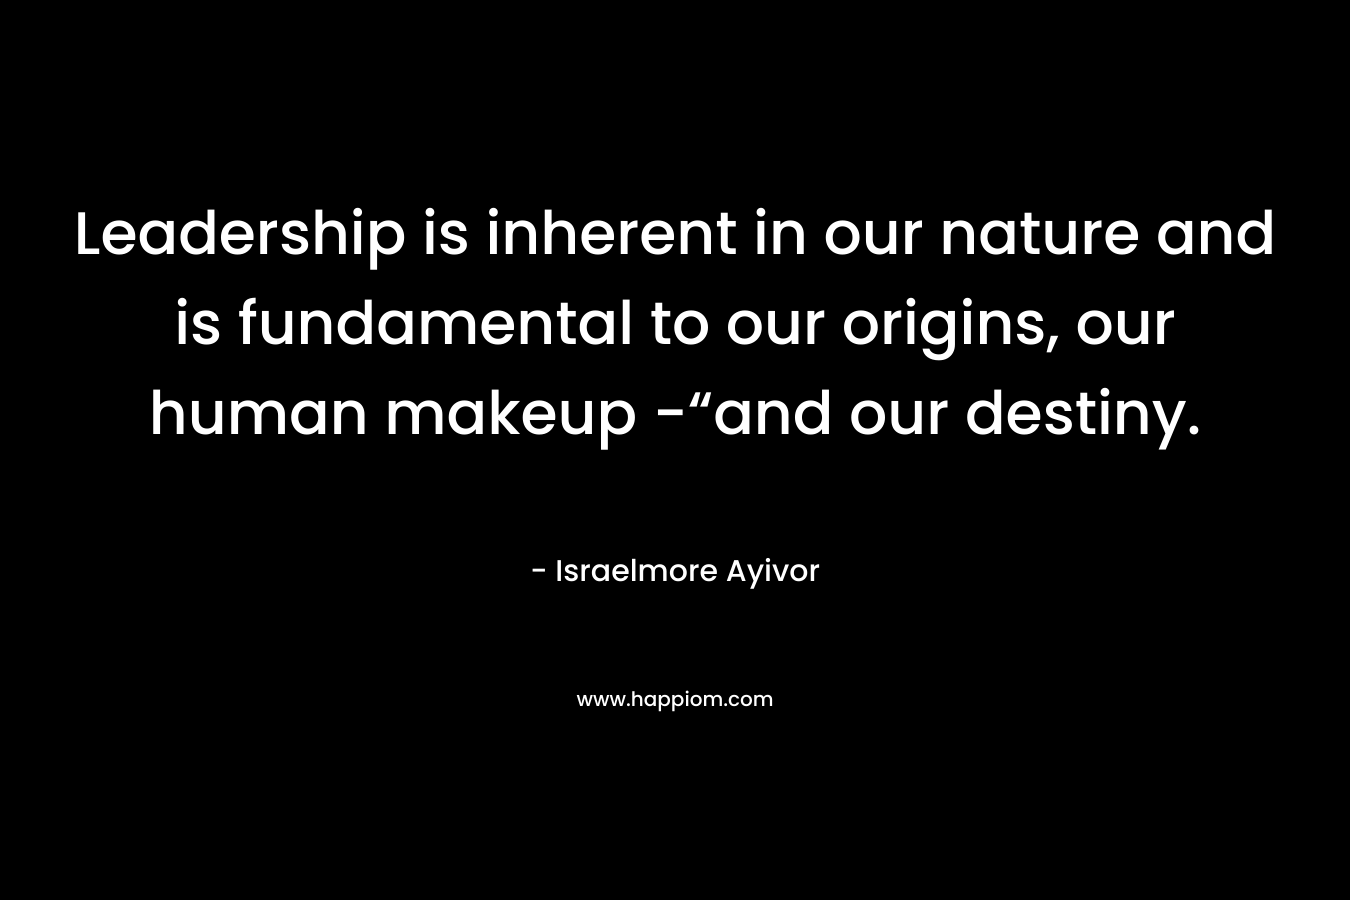 Leadership is inherent in our nature and is fundamental to our origins, our human makeup -“and our destiny. – Israelmore Ayivor